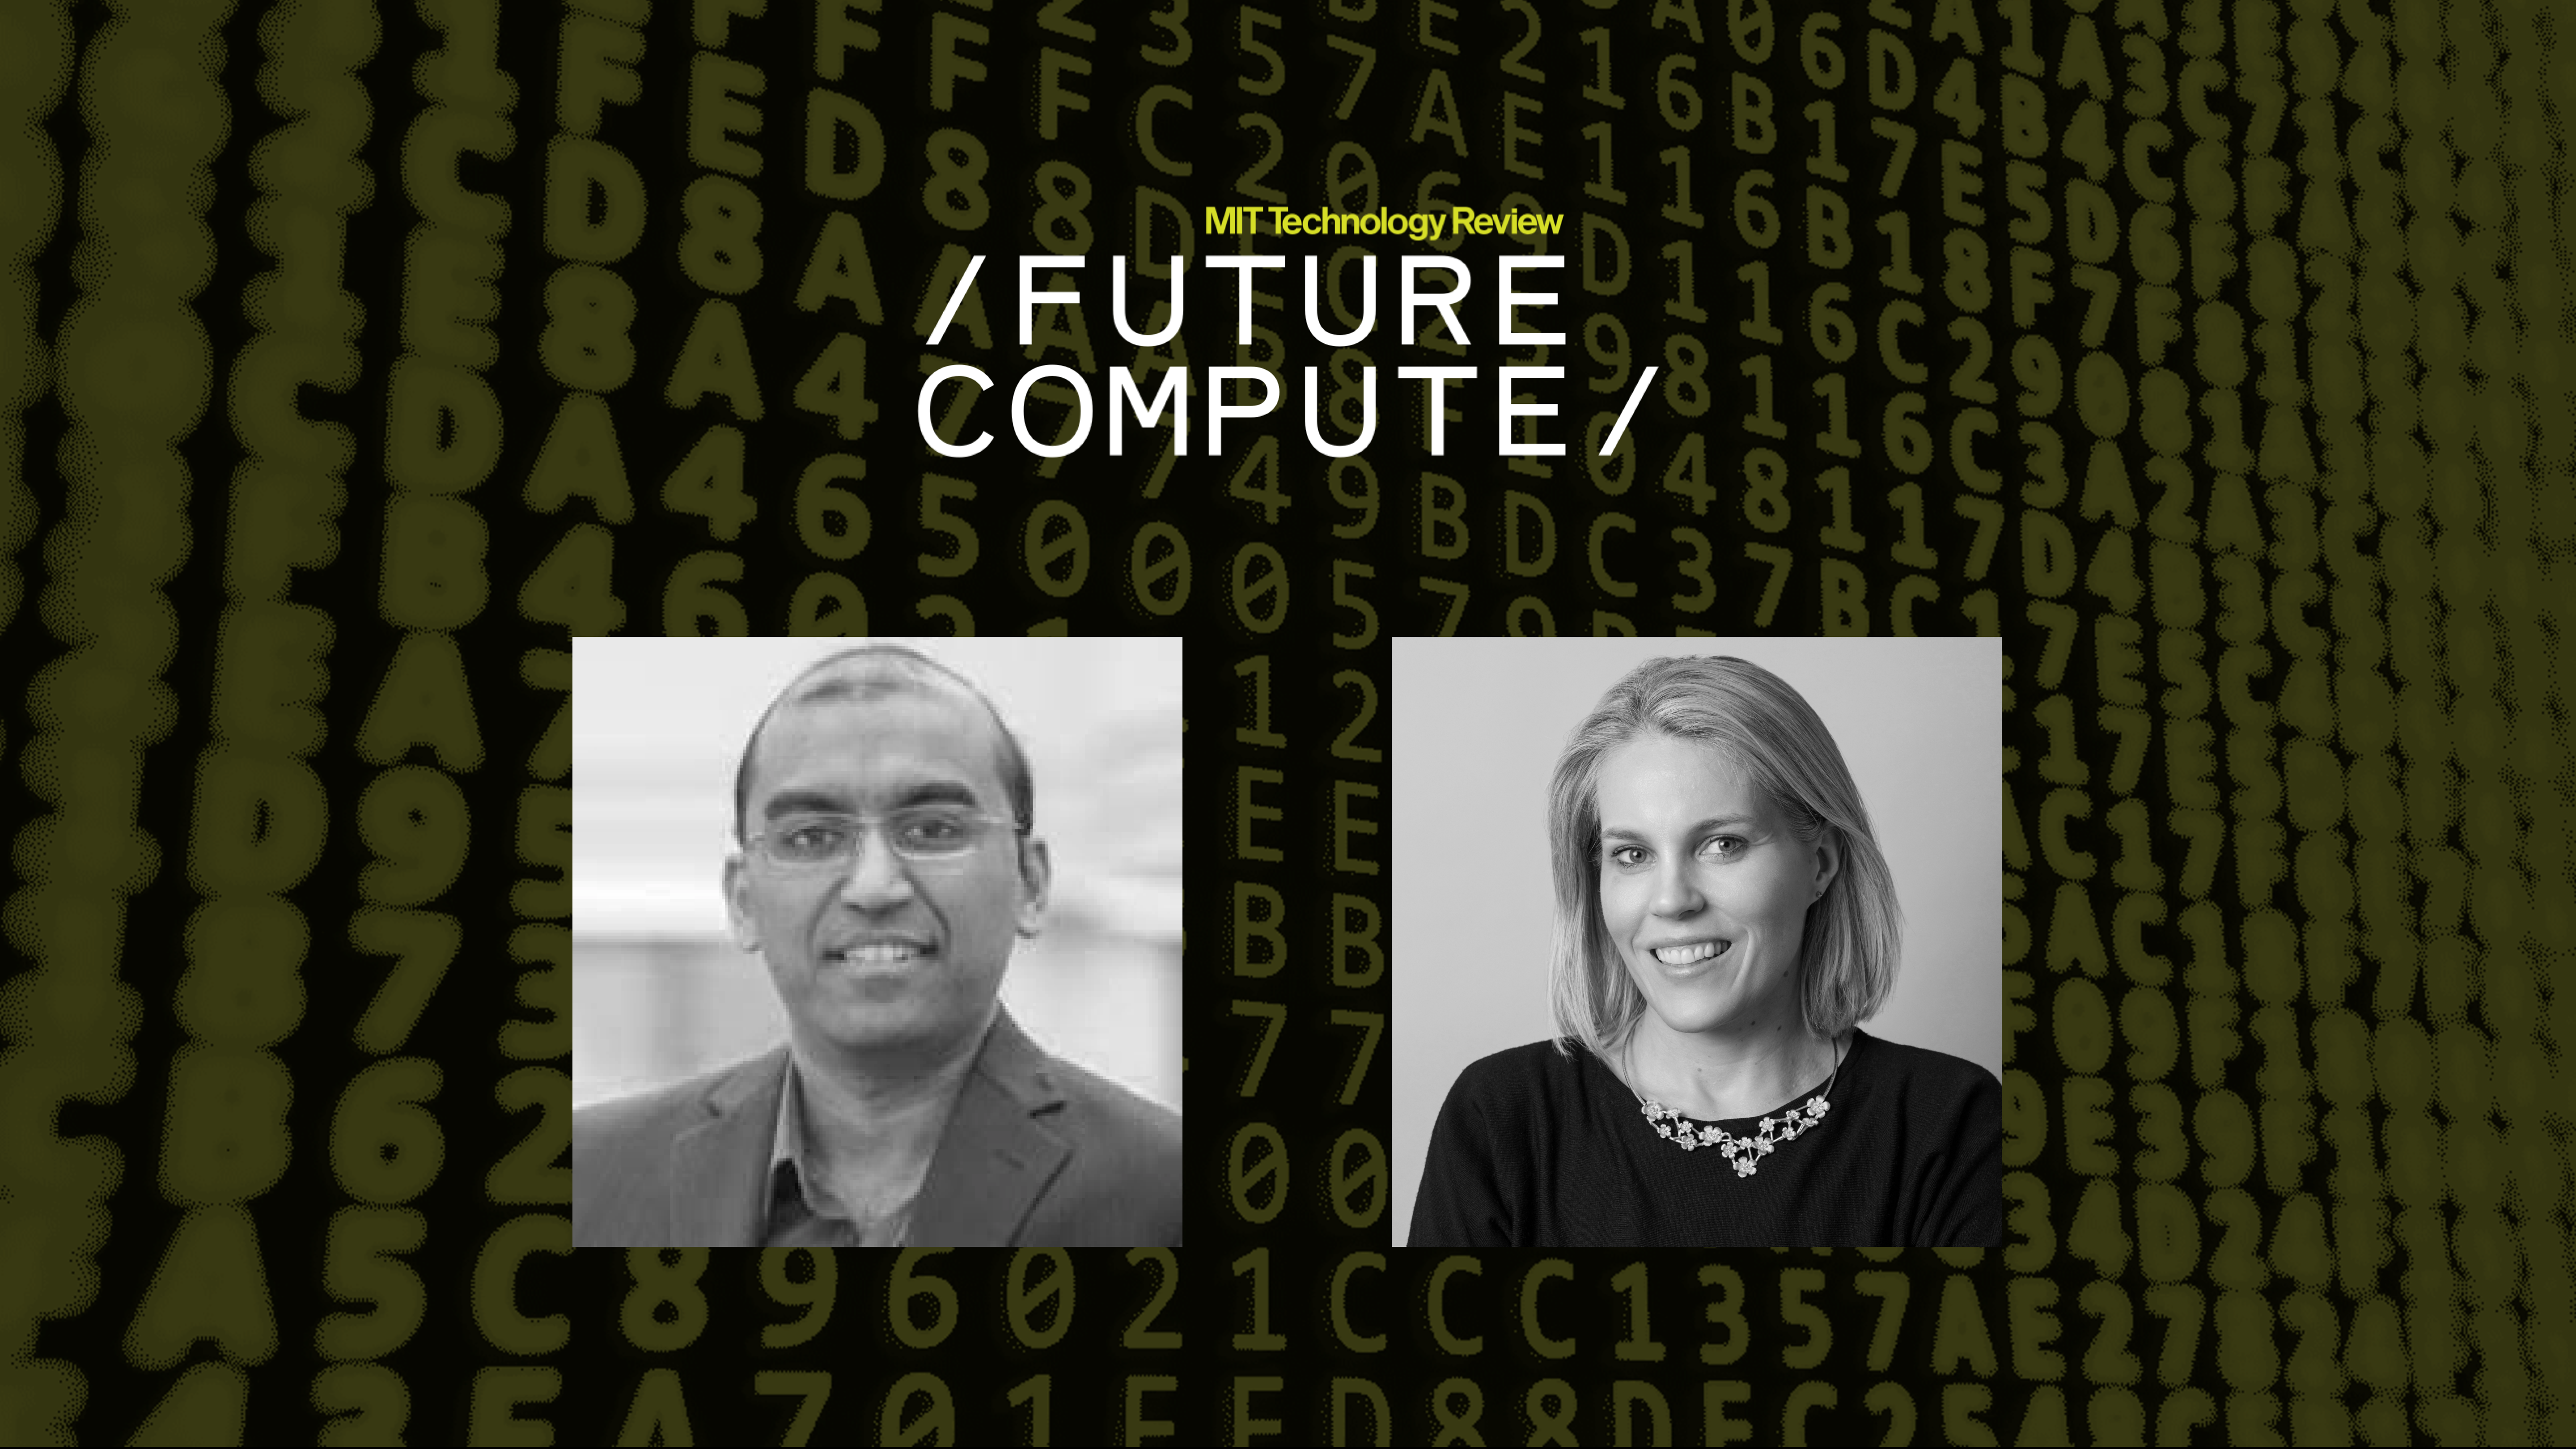 Arun Subramaniyan, Vice President, Cloud &amp; AI, Strategy &amp; Execution, Intel Corporation, and Elizabeth Bramson-Boudreau, MIT Technology Review